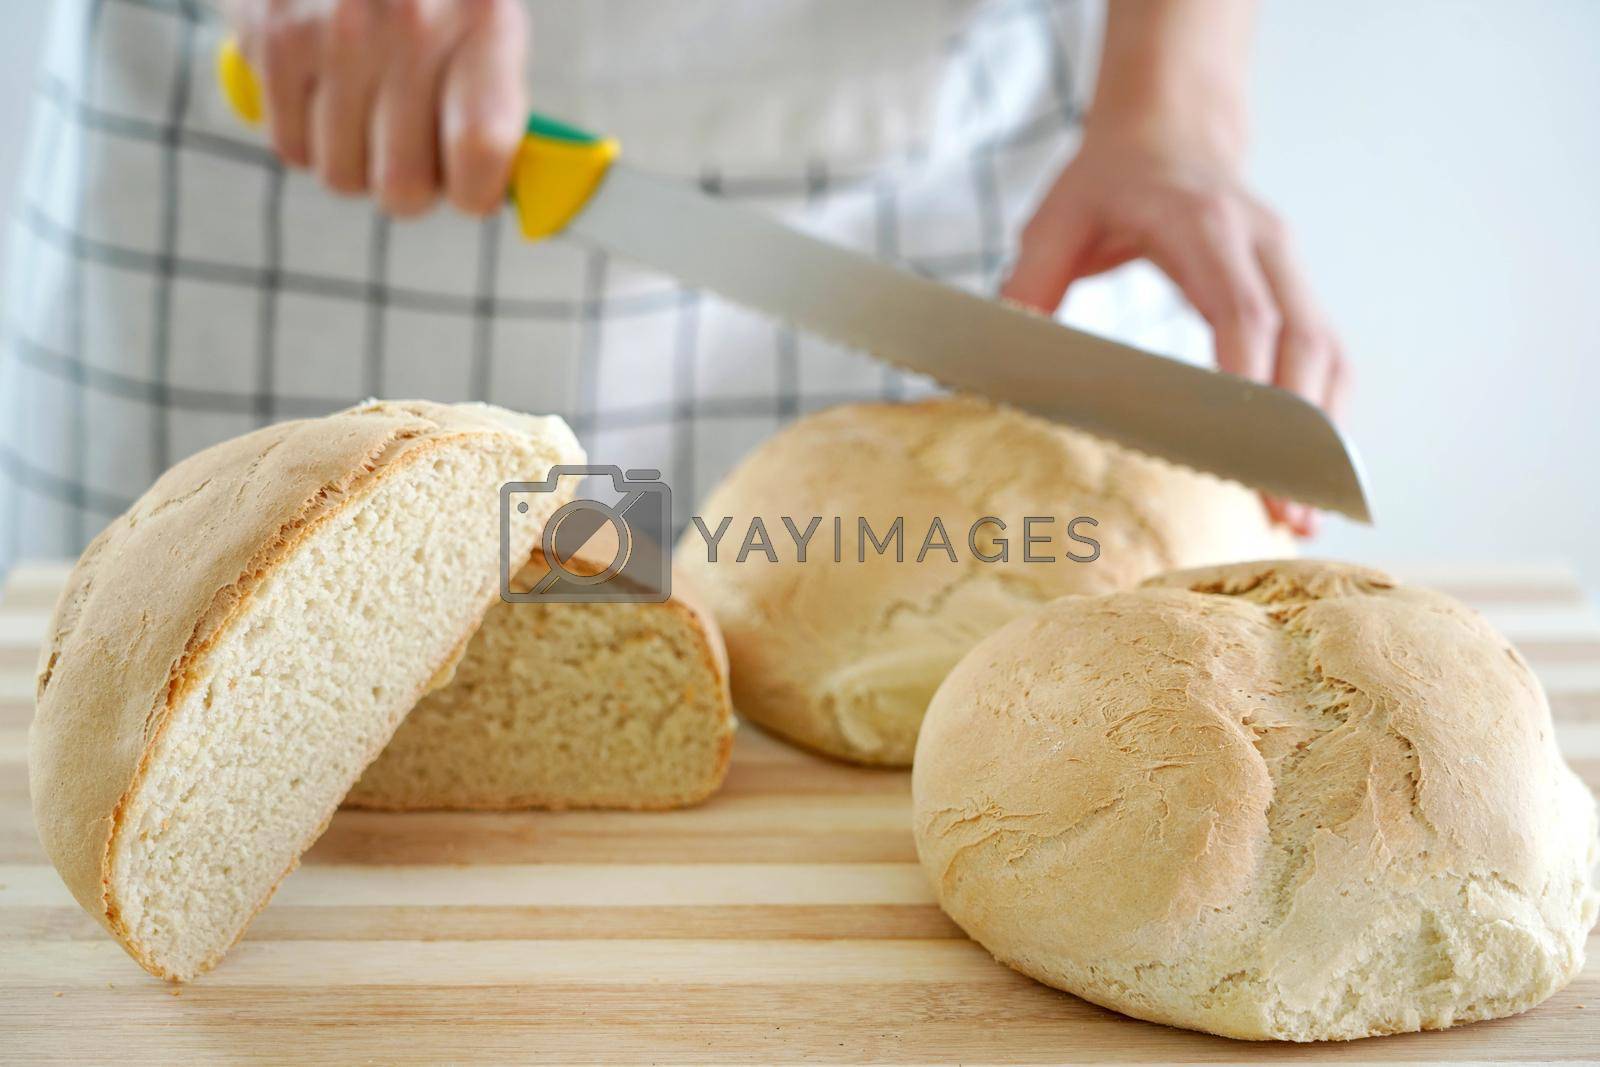 Royalty free image of Woman cutting homemade bread on wooden table, close-up by sergio_monti